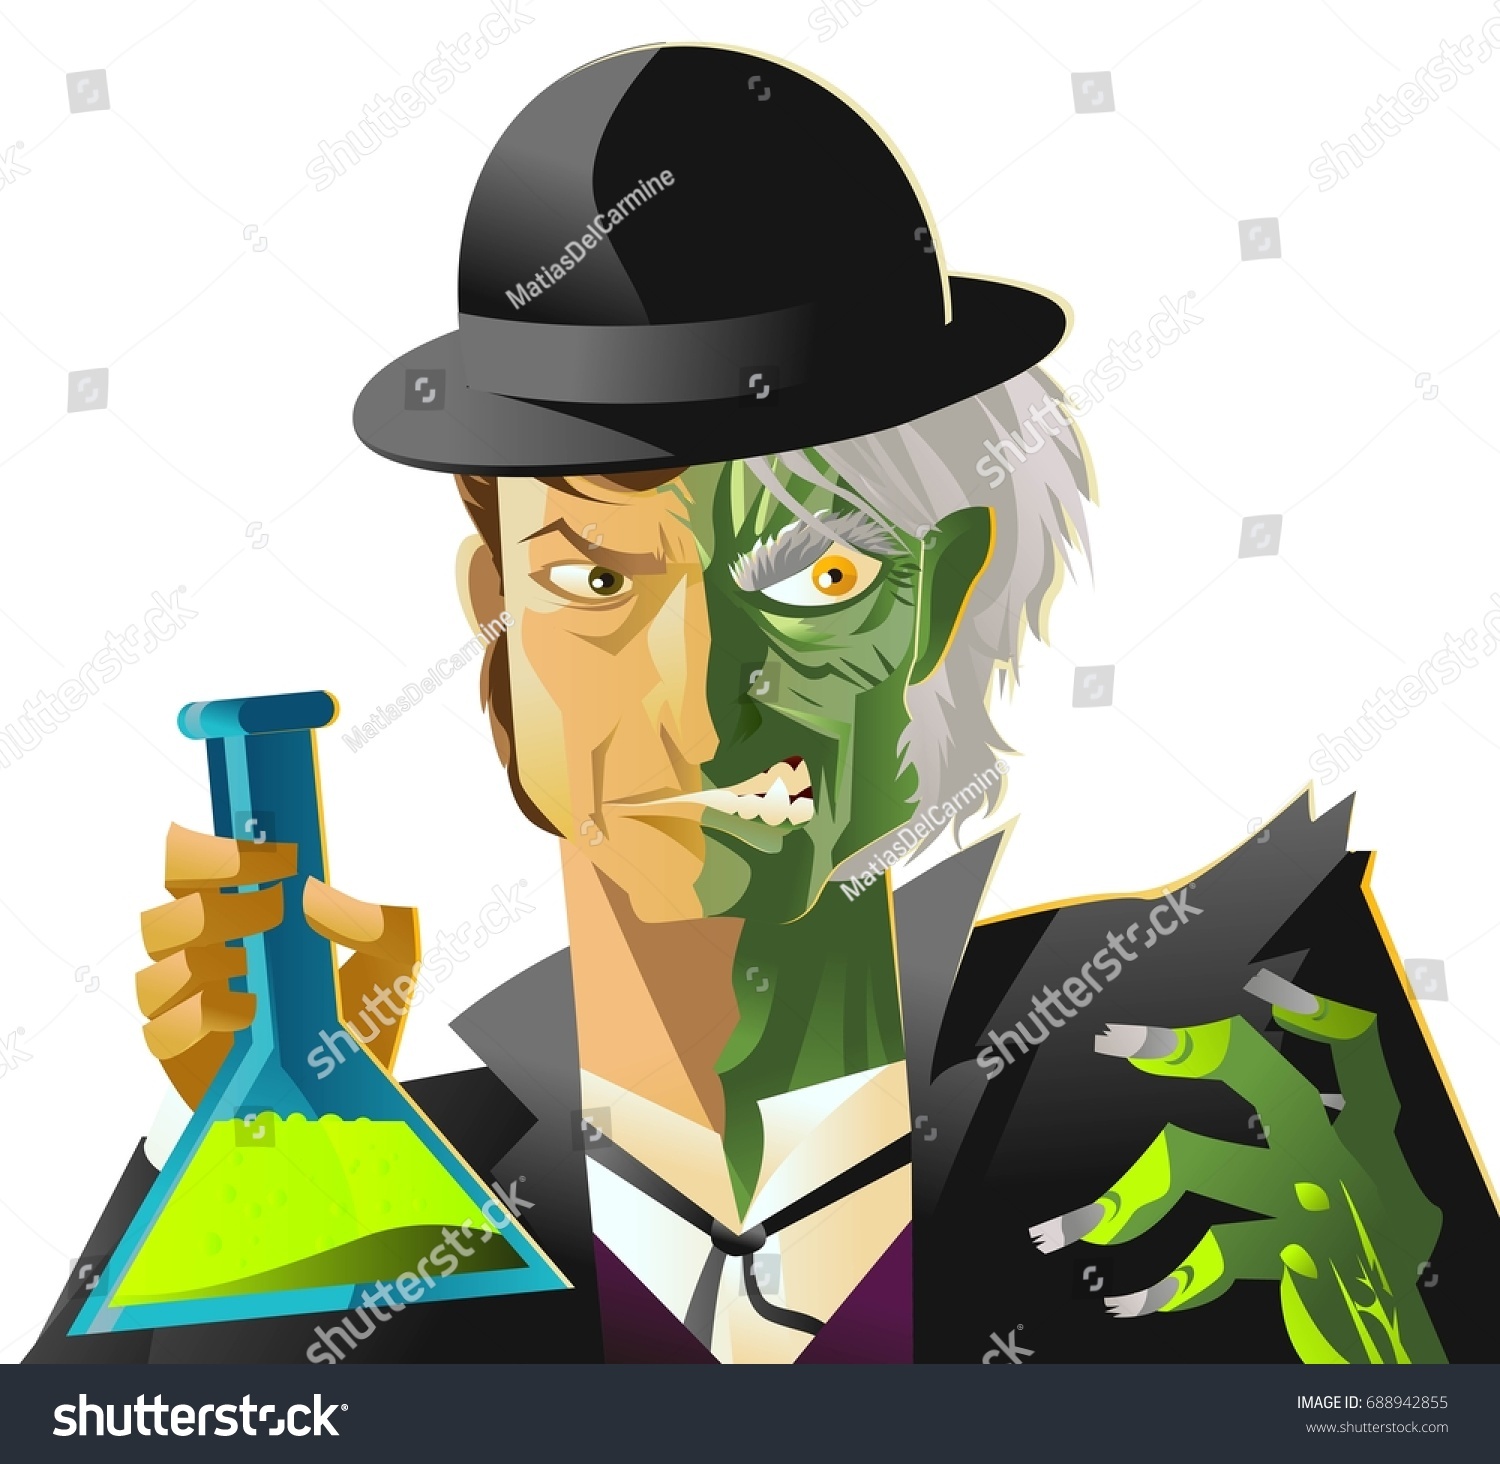 SVG of doctor jekyll and mister hyde monster transformation with green potion svg